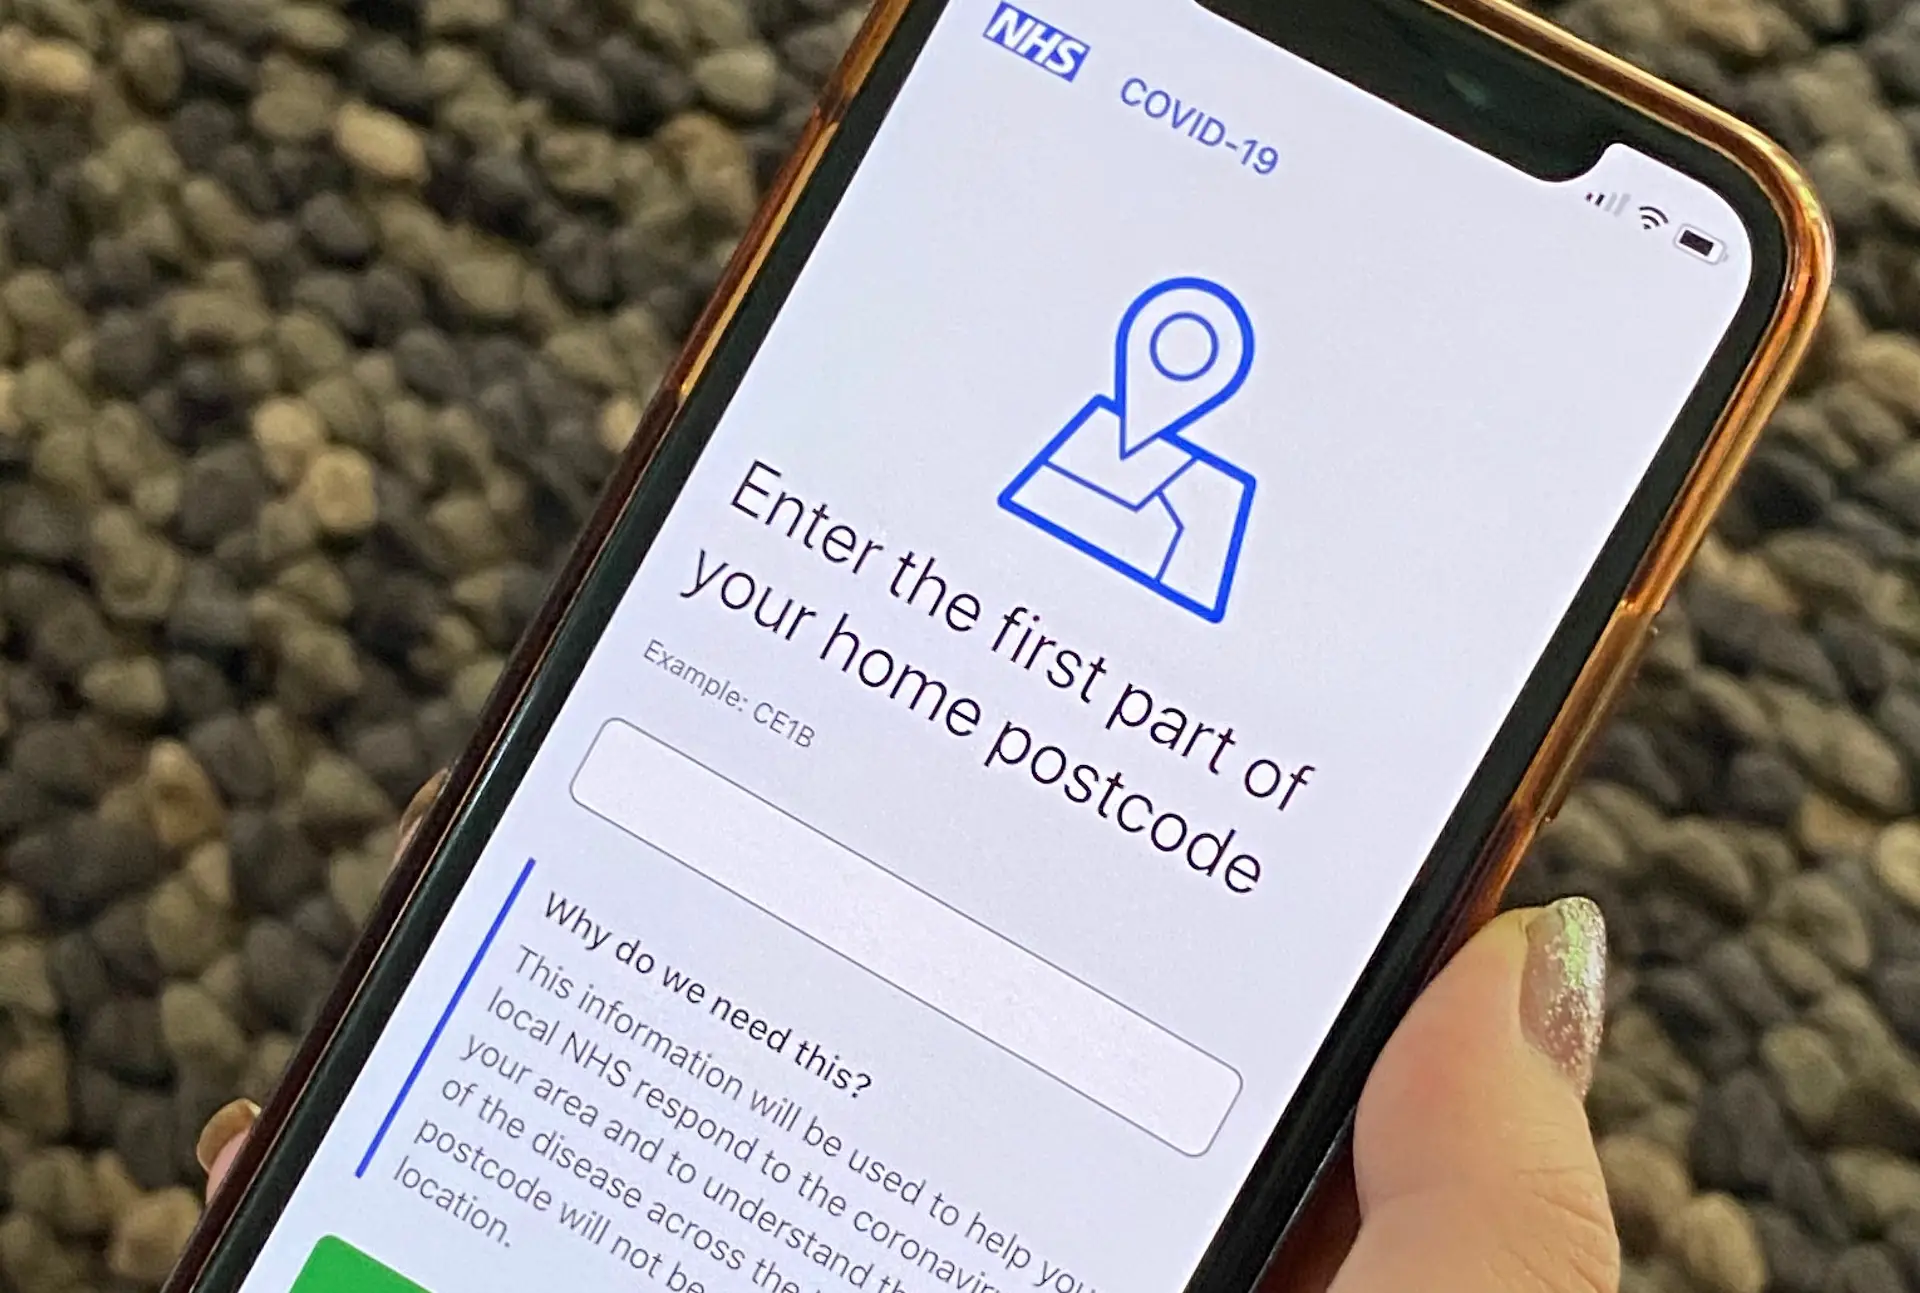 enter postcode screen on contact tracing app